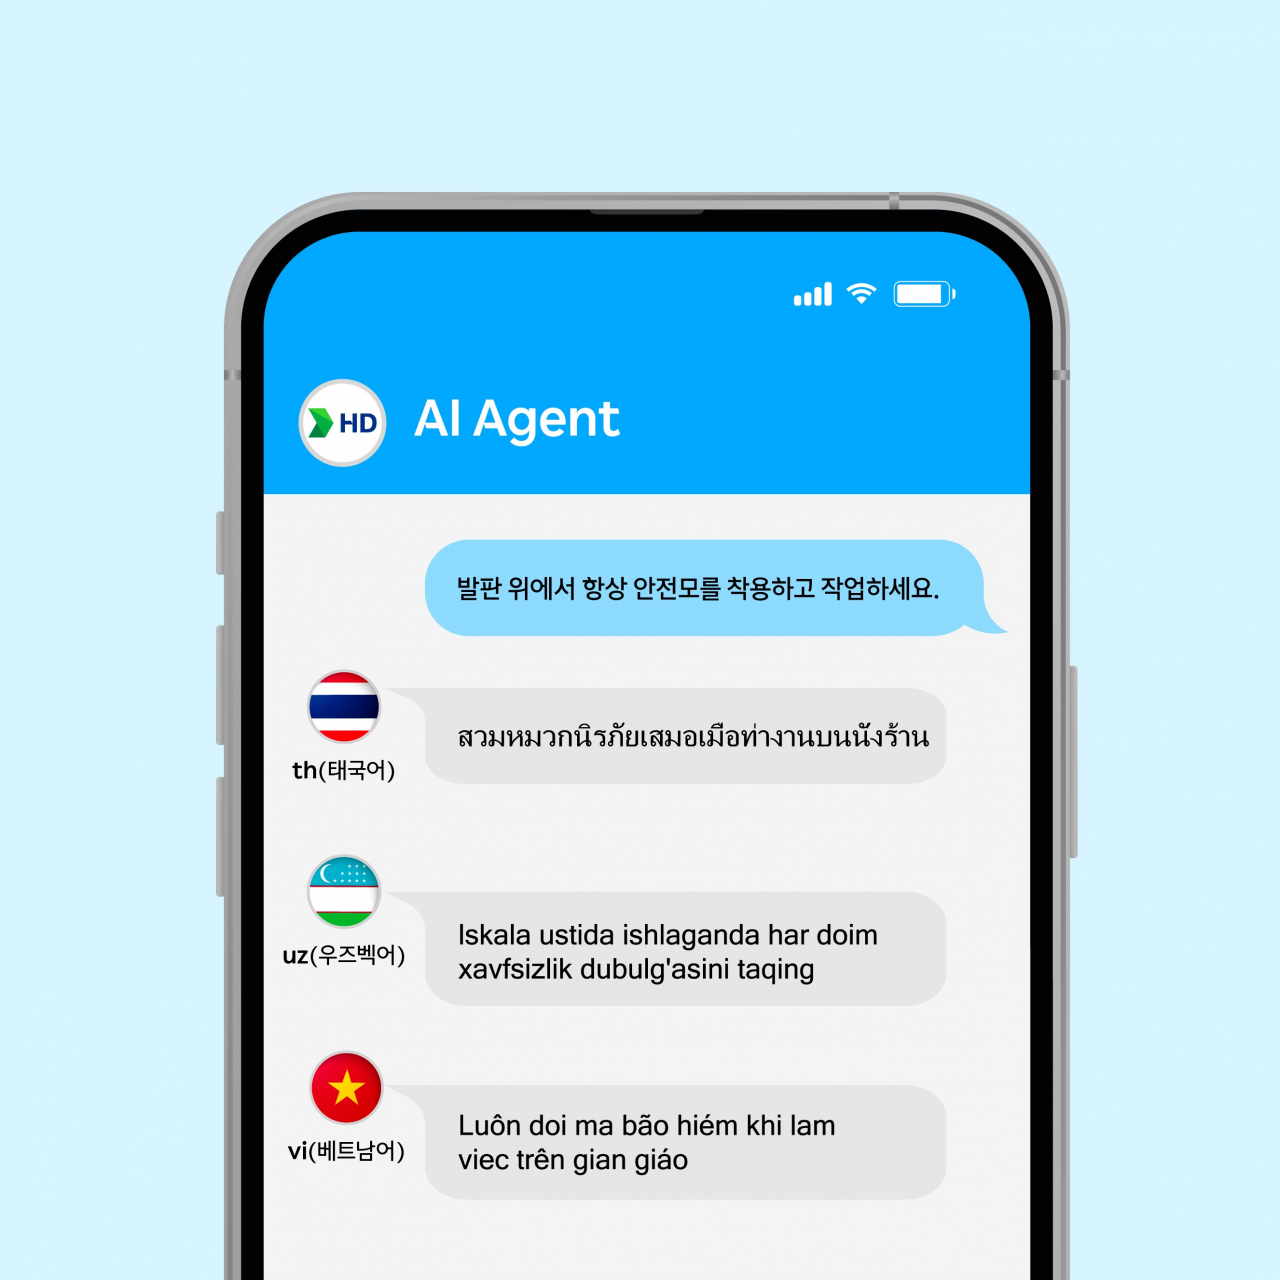 An image of HD Korea Shipbuilding & Offshore Engineering's artificial intelligence translation service AI Agent (HD Hyundai)